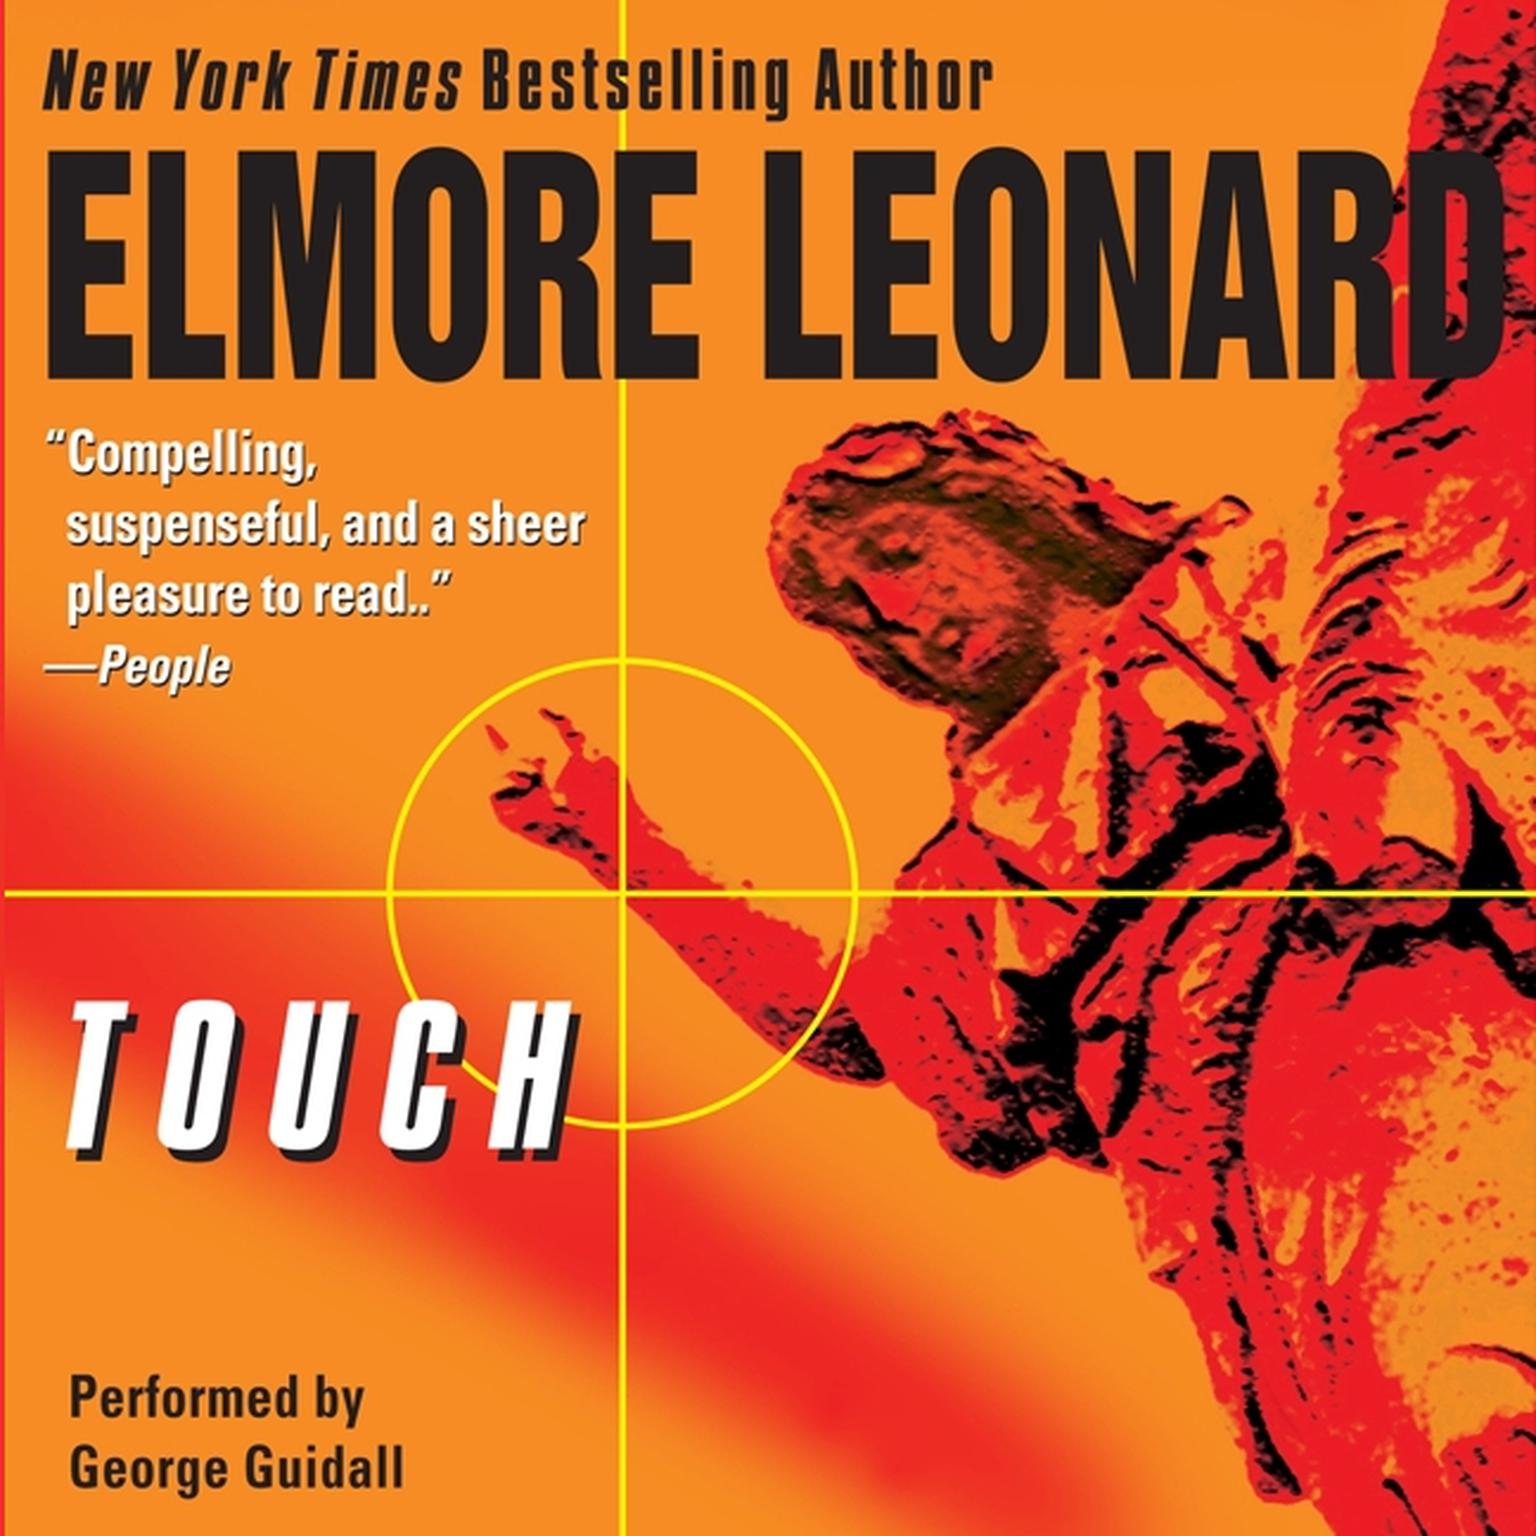 Touch Audiobook, by Elmore Leonard